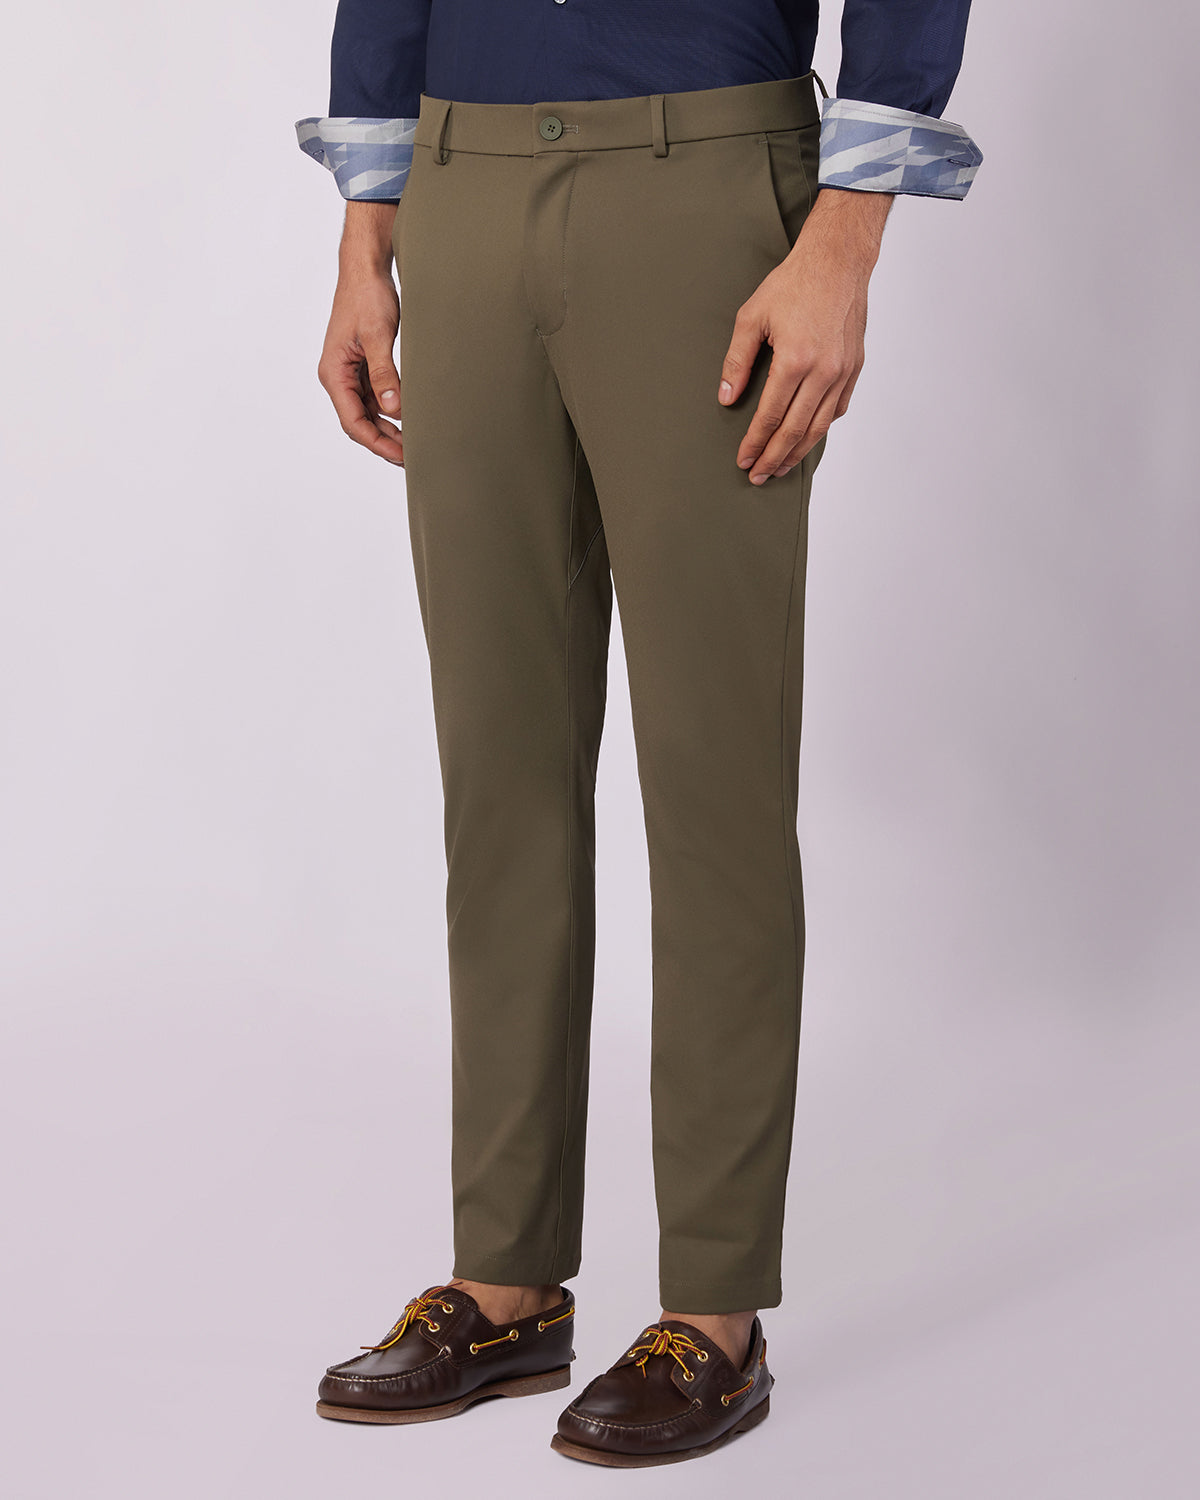 American Eagle Outfitters Mens Trousers - Buy American Eagle Outfitters  Mens Trousers Online at Best Prices In India | Flipkart.com